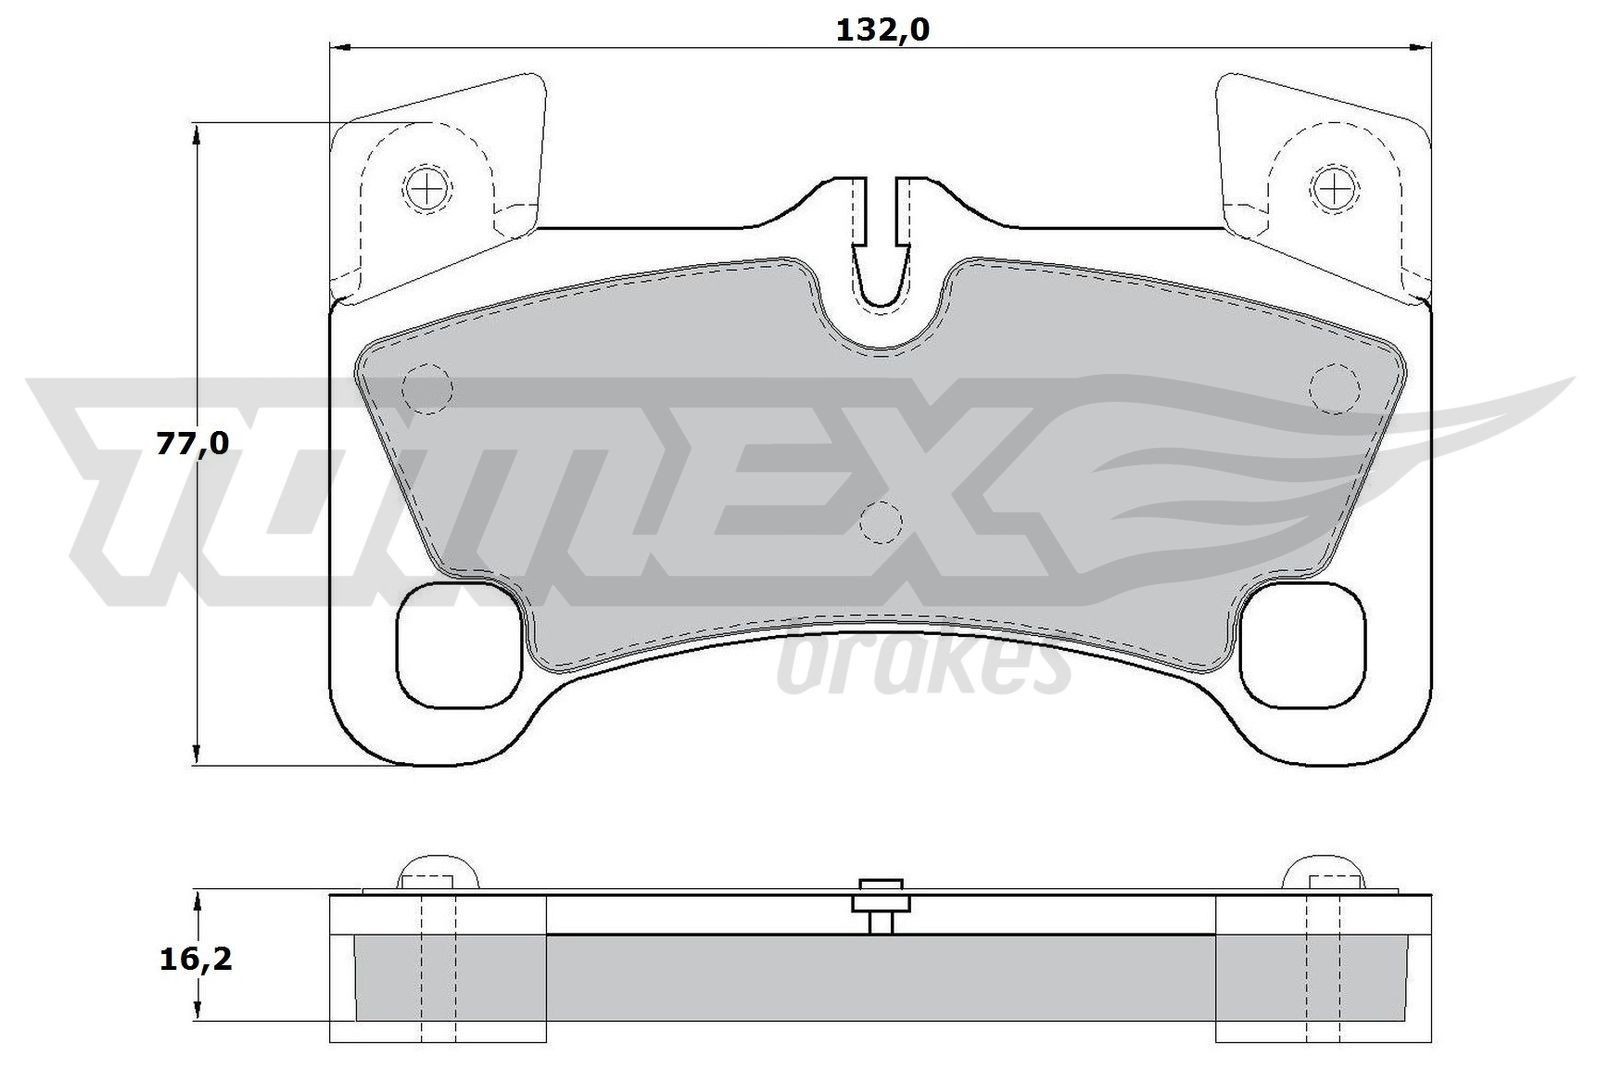 TOMEX brakes TX 17-15 Brake pad set Rear Axle, prepared for wear indicator, with counterweights